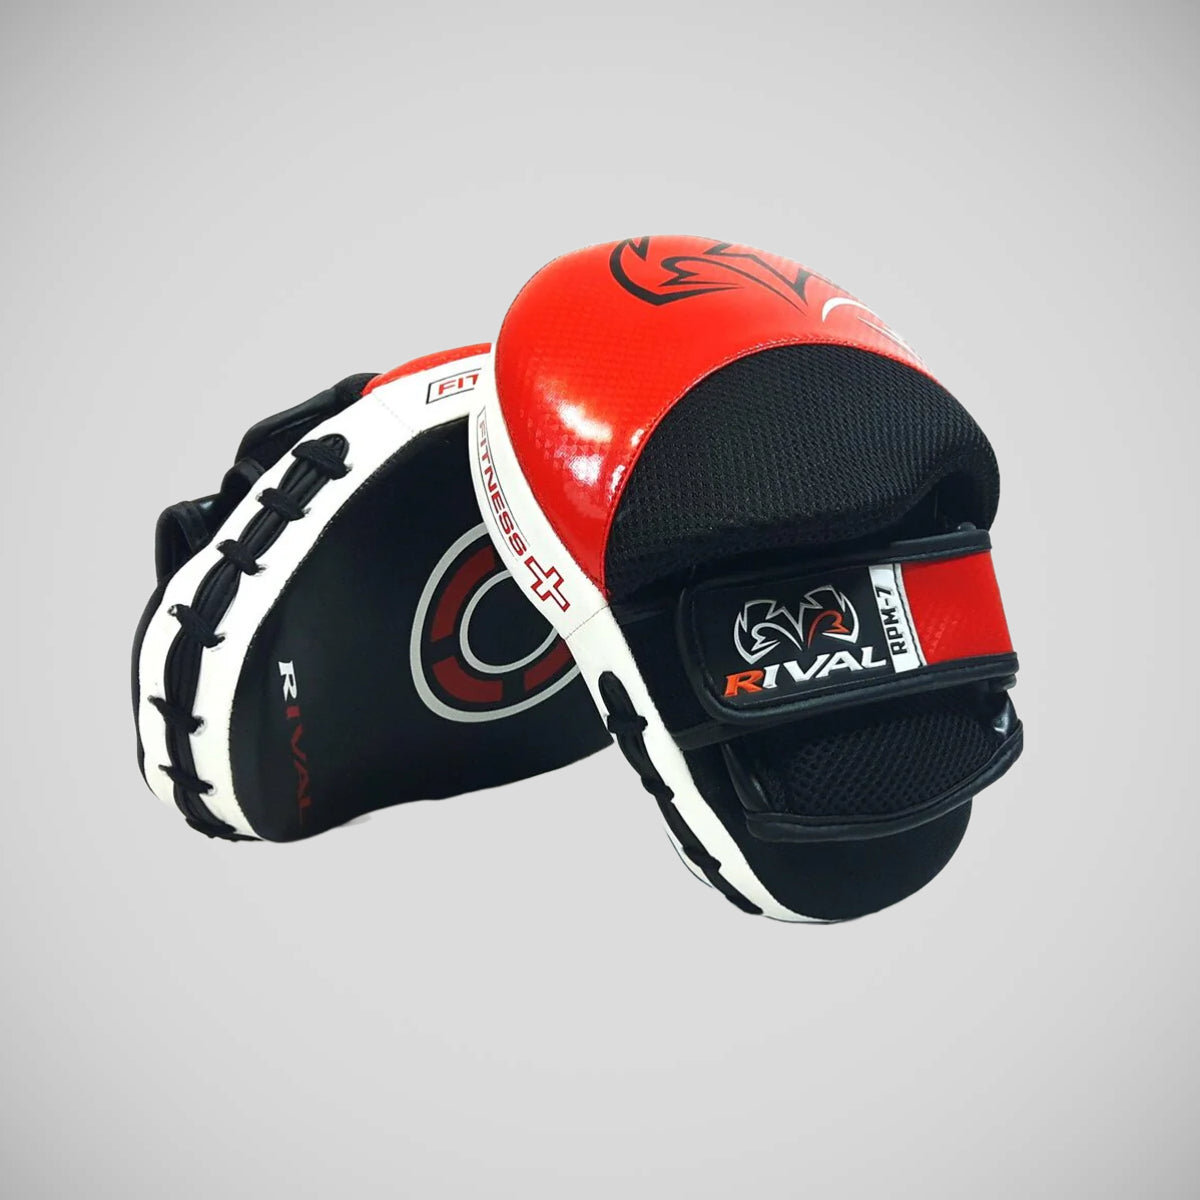 RDX Pattes d'ours Boxe, Boxing Pads Mini Focus Mitts, Thai MMA